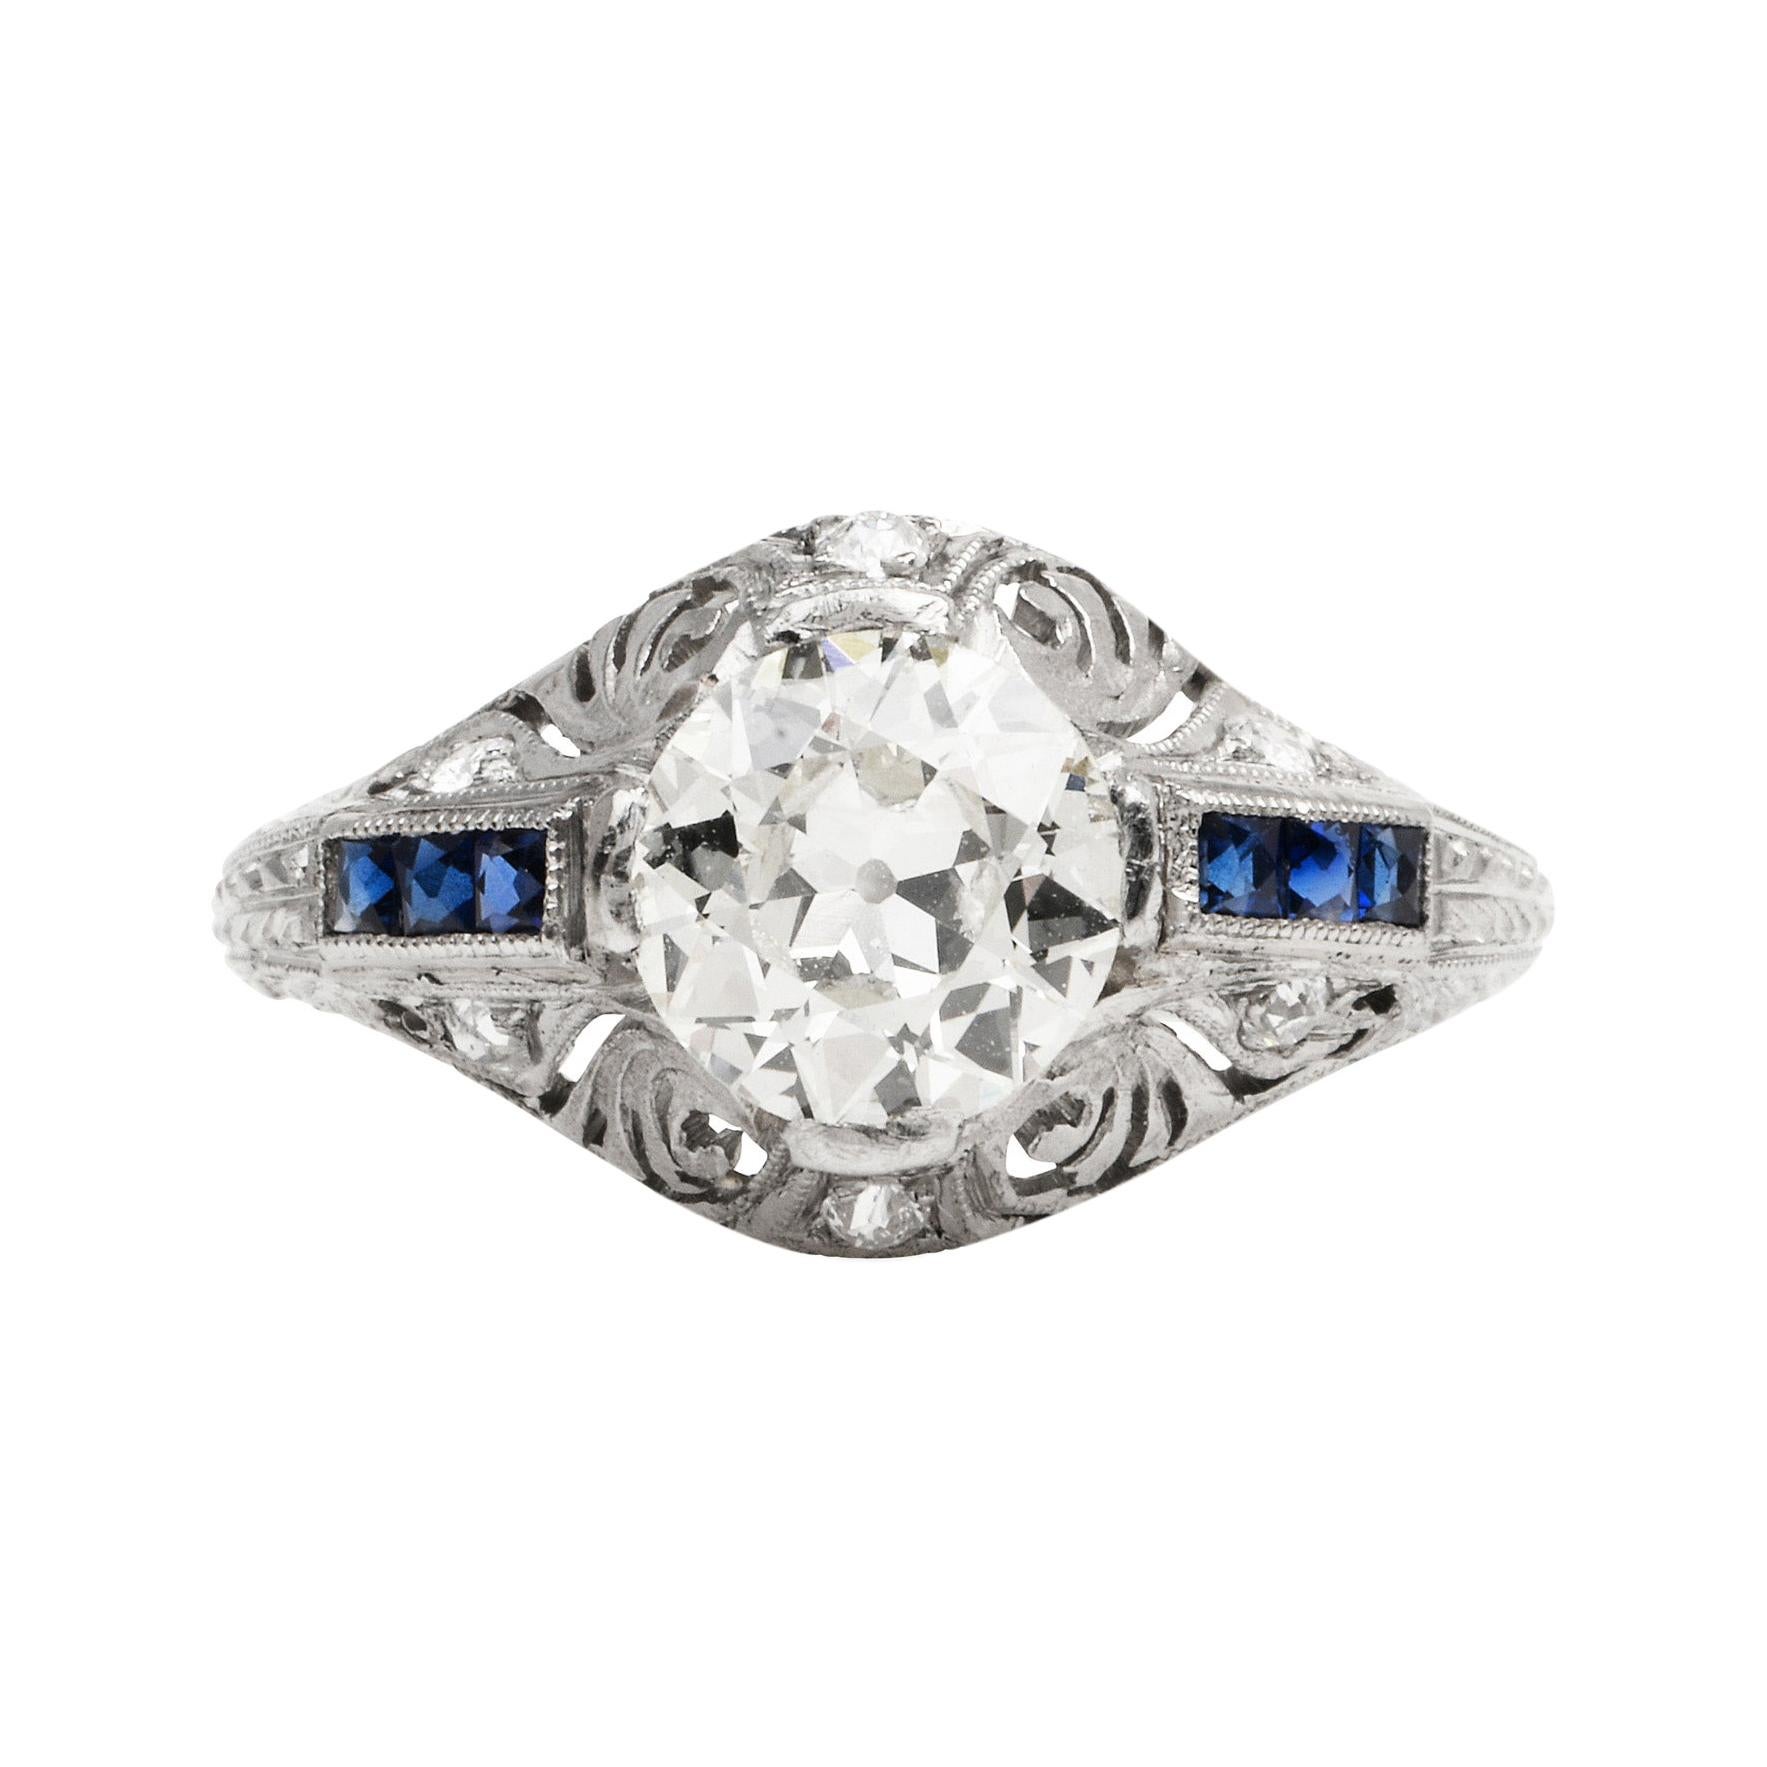 Fine Art Deco Engagement ring, with a high-quality center-diamond surrounded by handmade filigree design,

Crafted in solid Platinum, the center is adorned by (1) Old Cut, prong-set, genuine diamonds weighing in total 1.00 carats, ( I-J color and VS